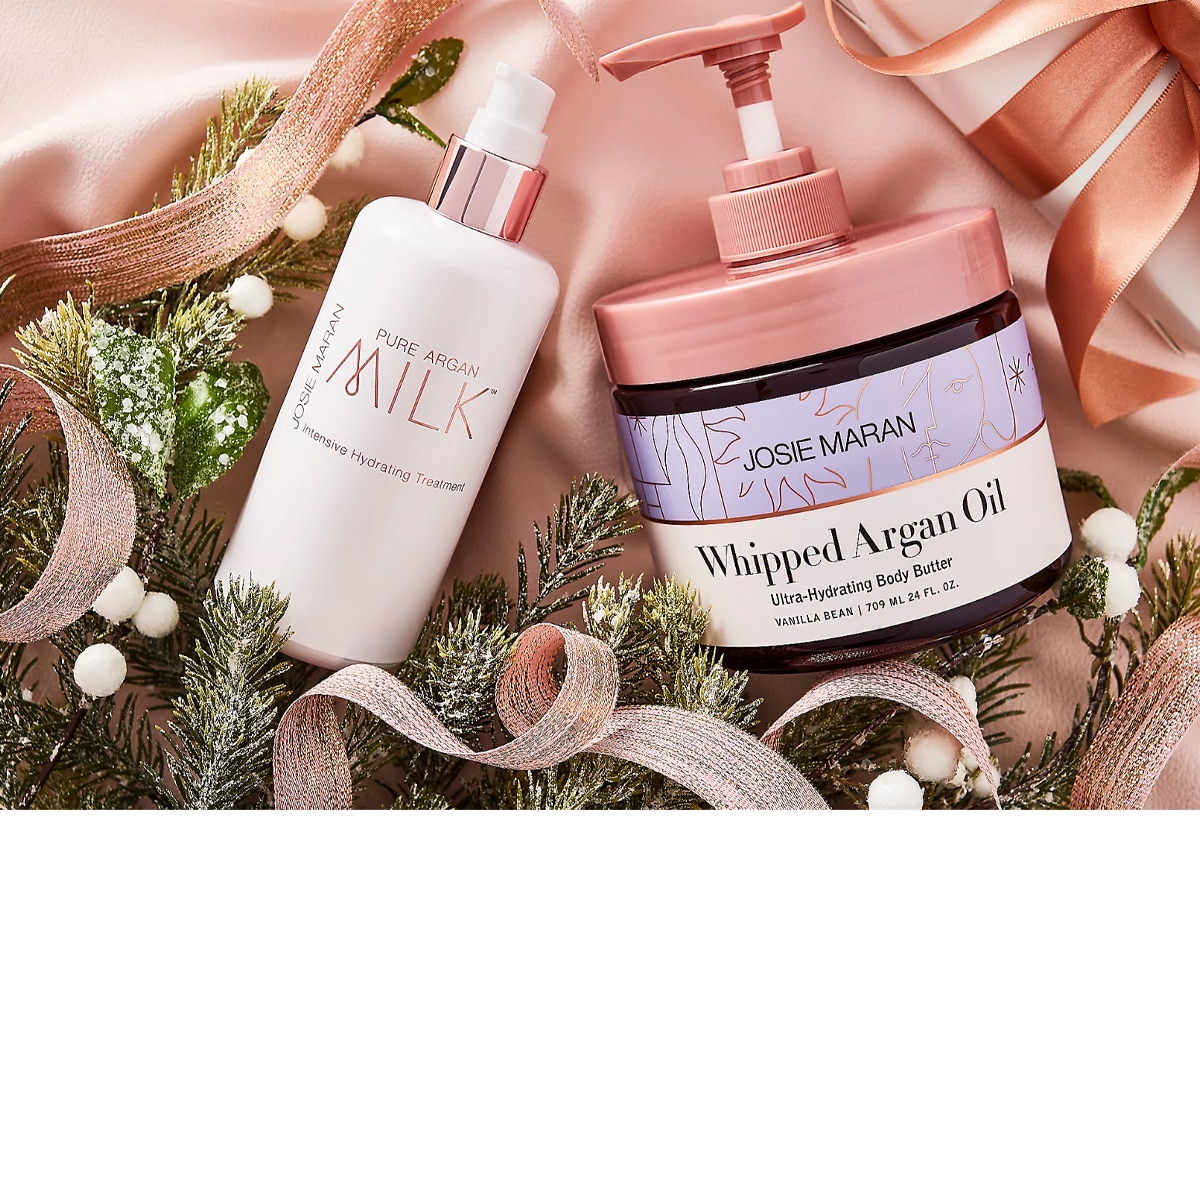 Pammy Blogs Beauty: Holiday Shopping Gift Guide: Body Care Gift Sets and  Supplements!